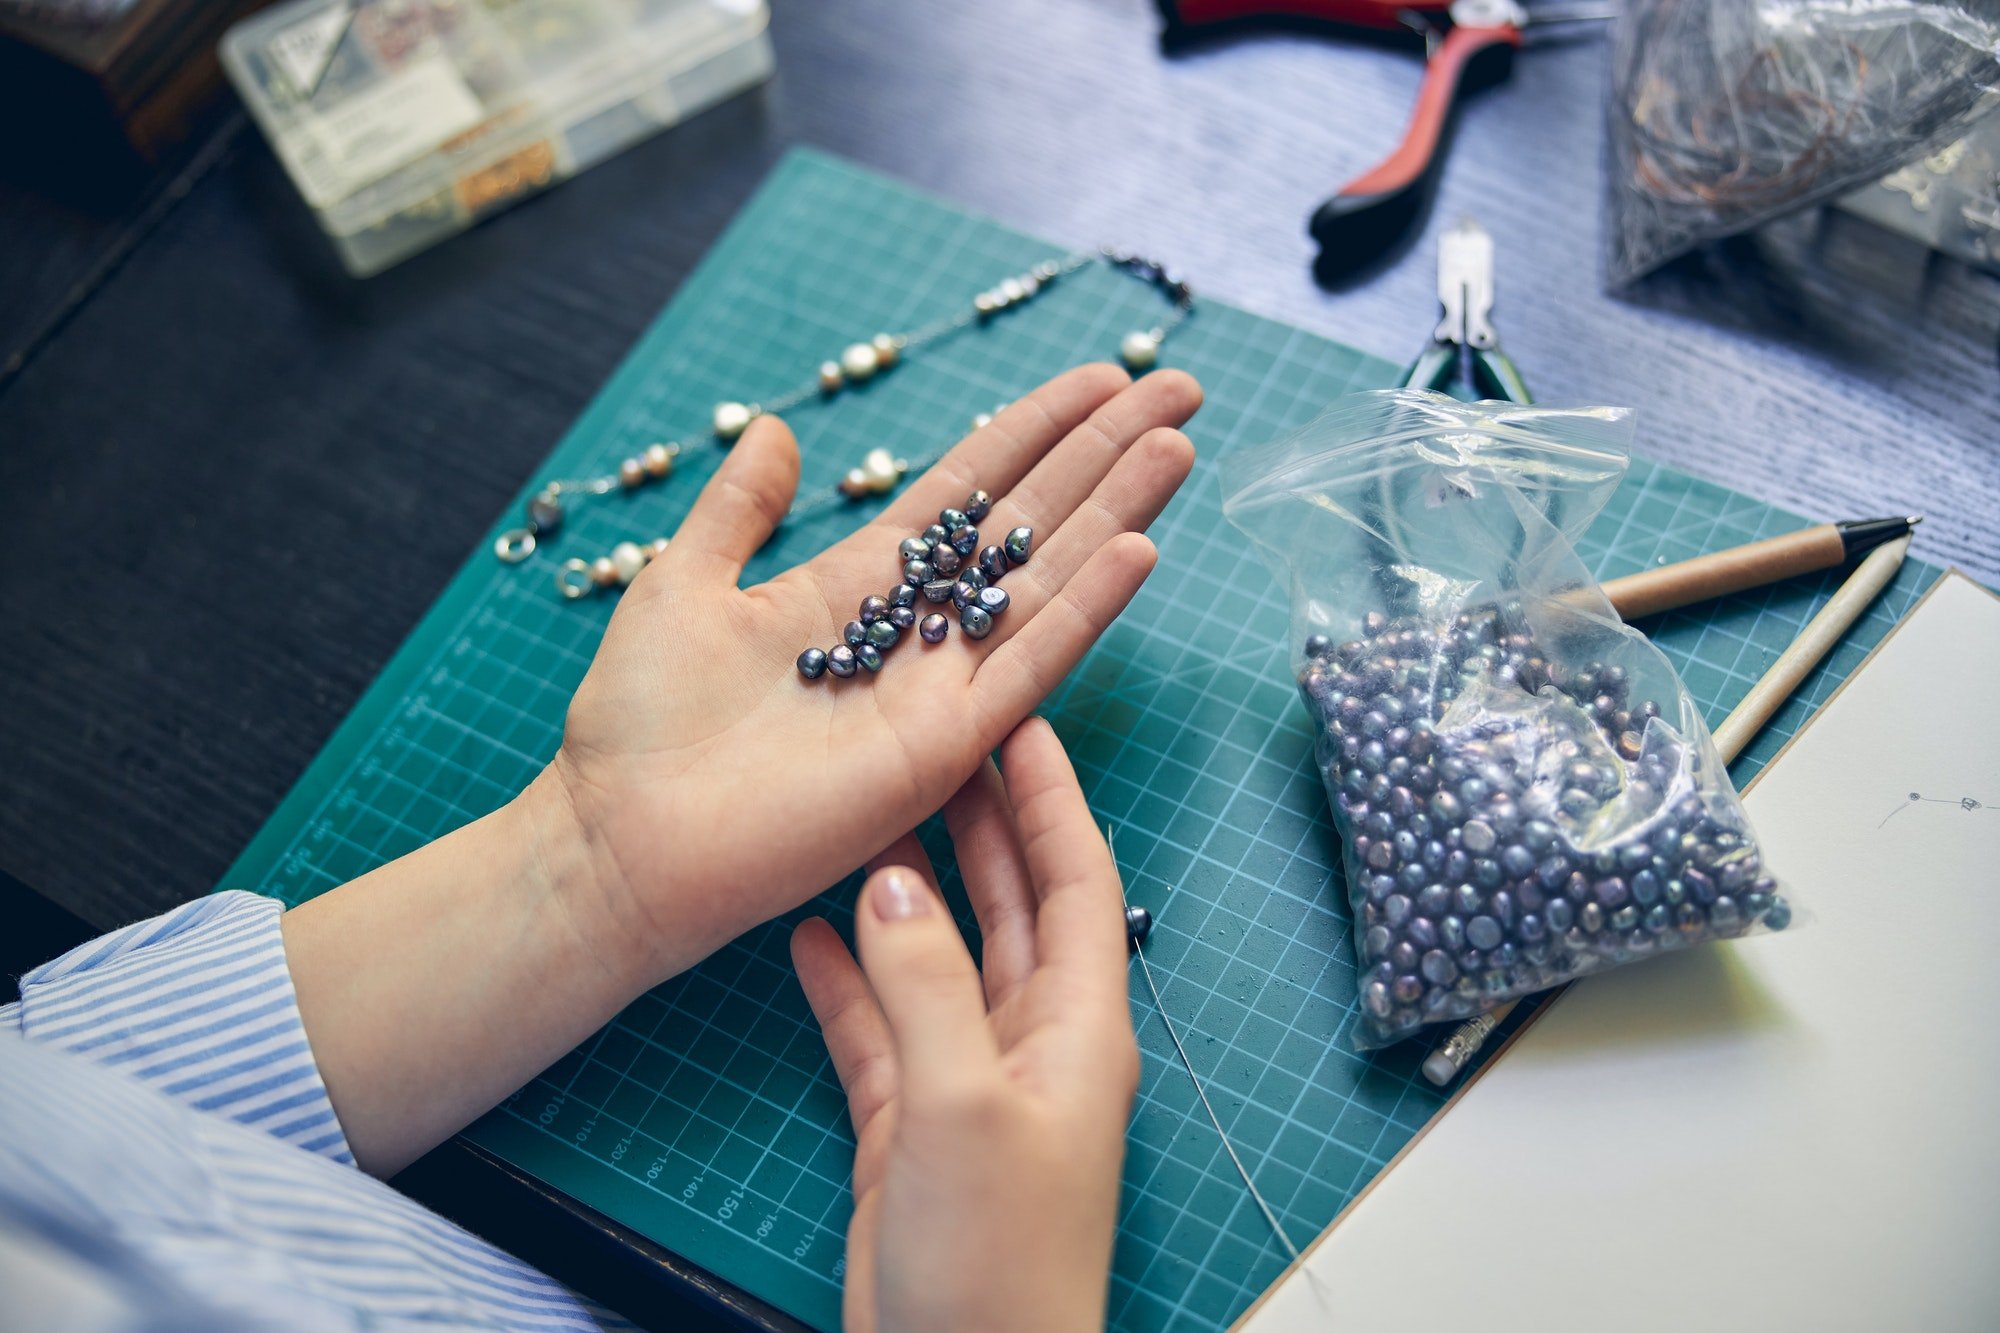 Jewelry expert holding material for a new product creation